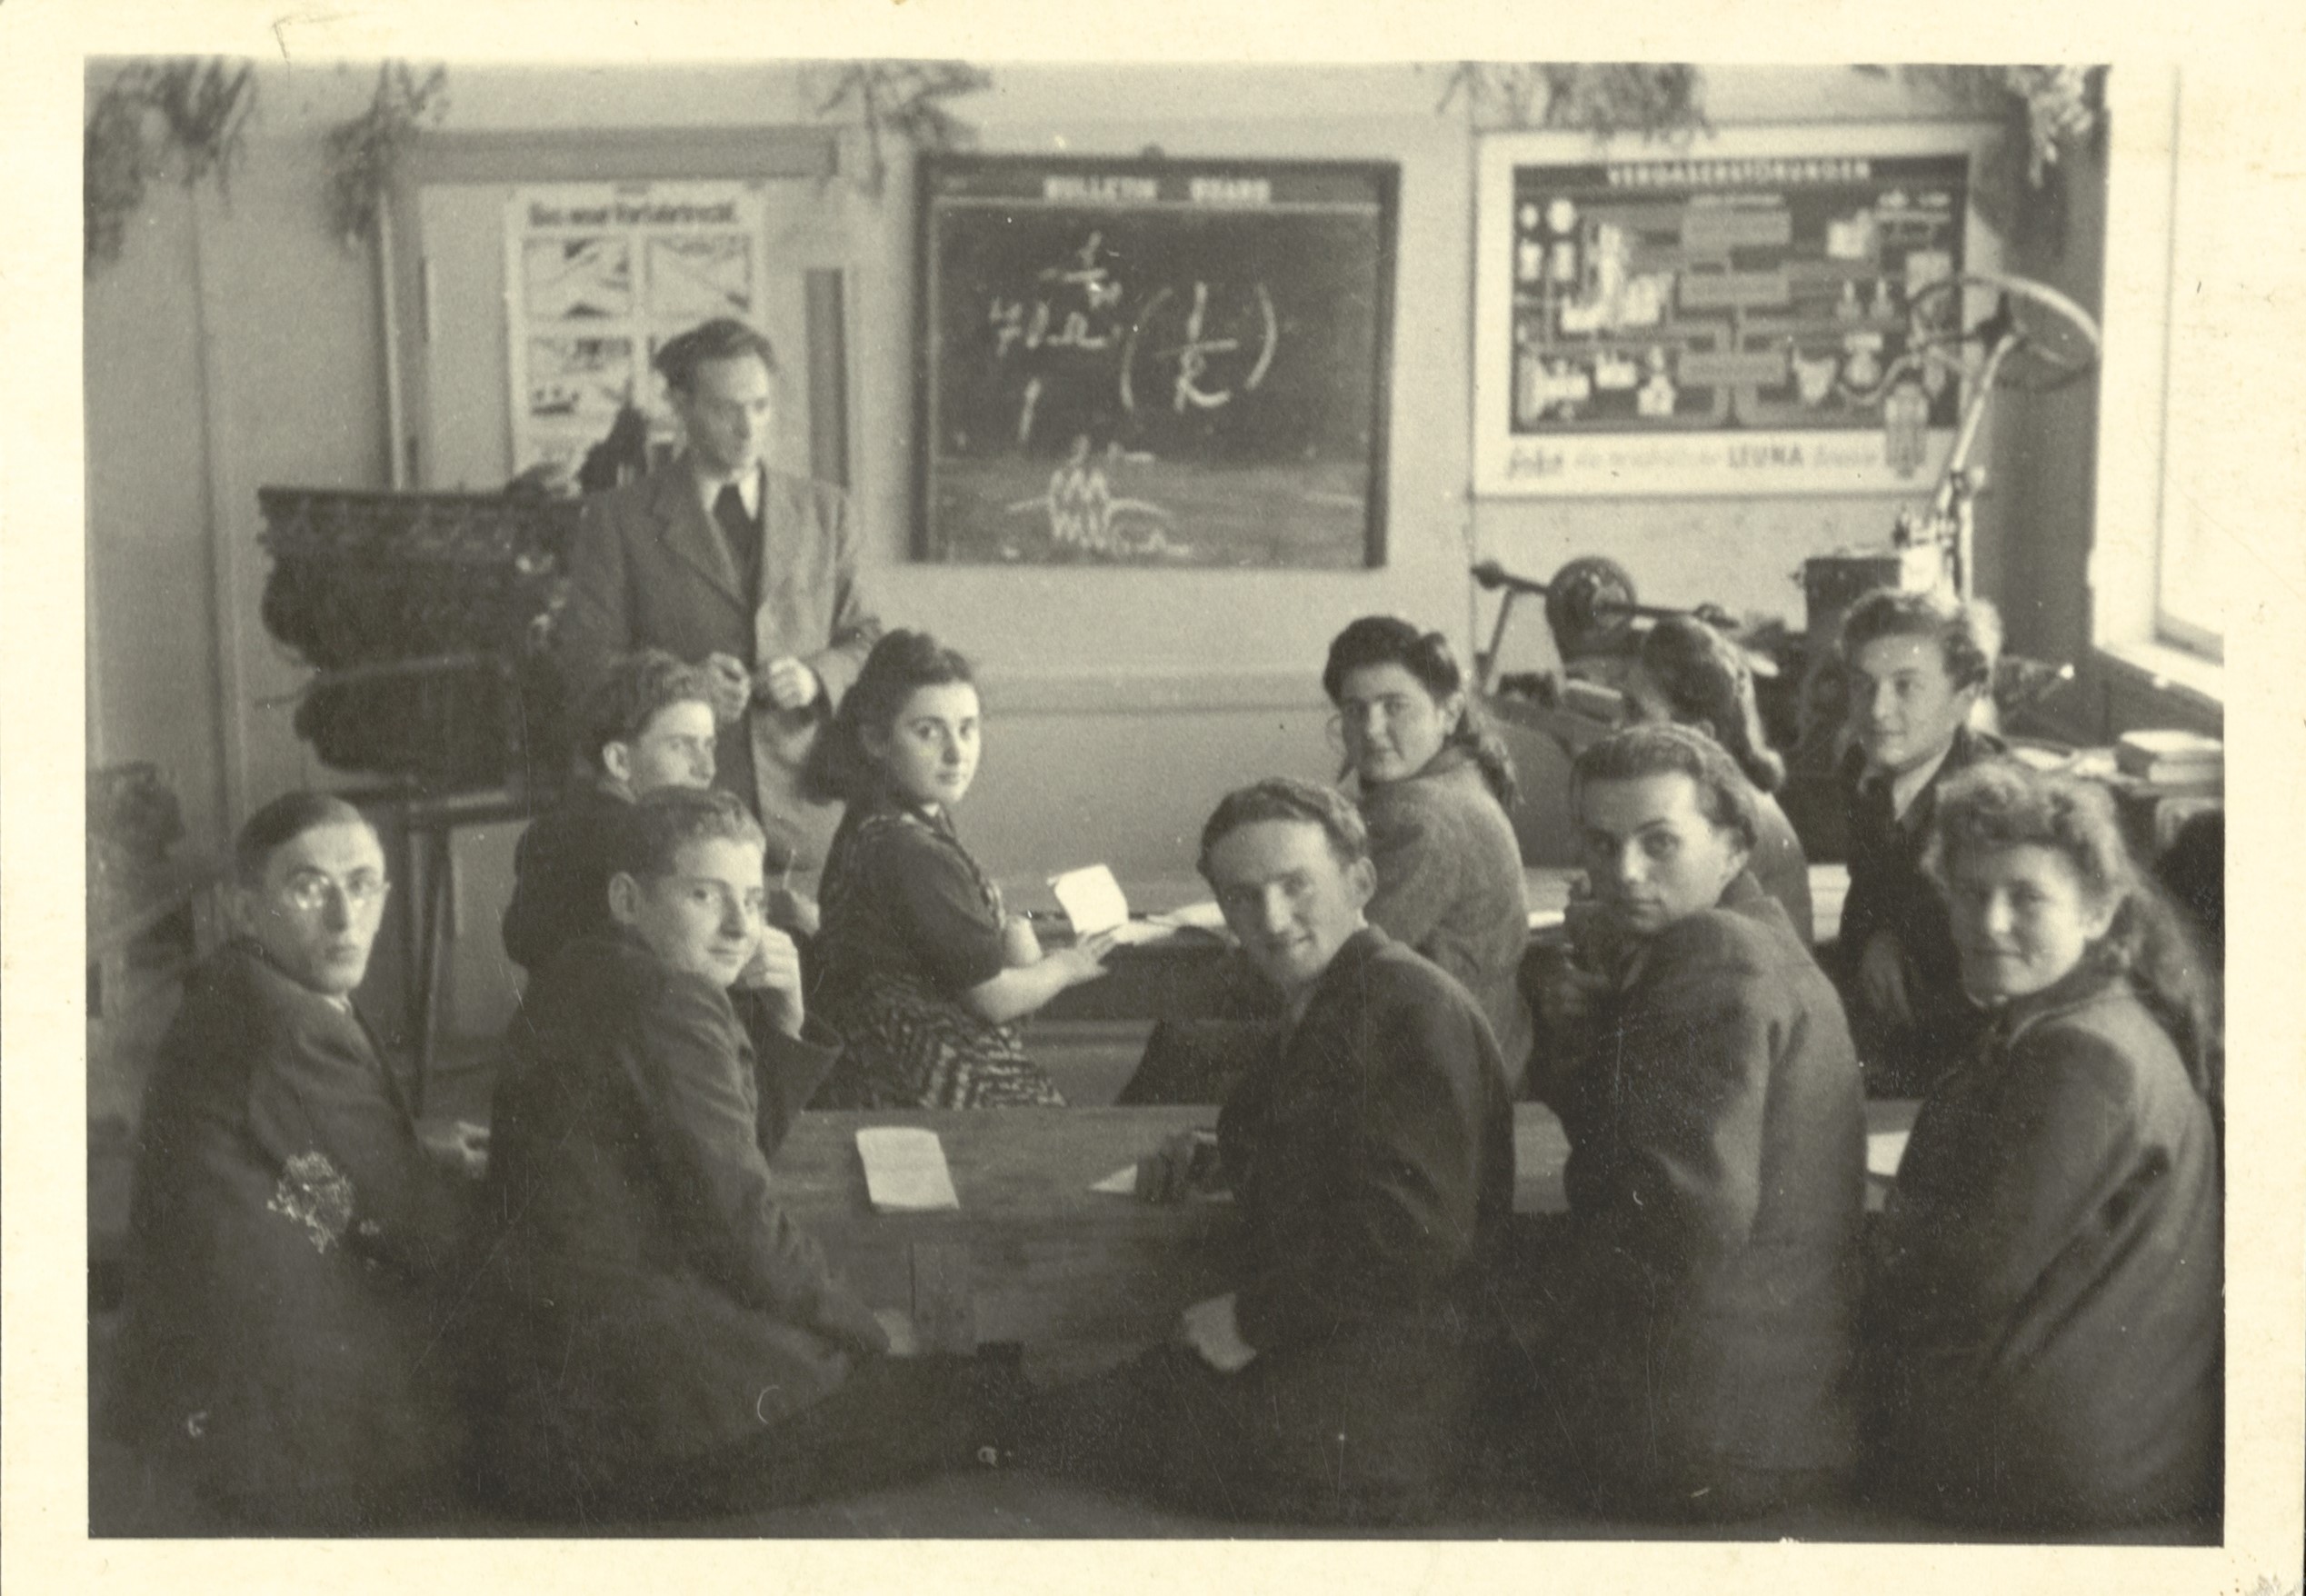 Black and white photograph of students taking a class postwar in a DP camp